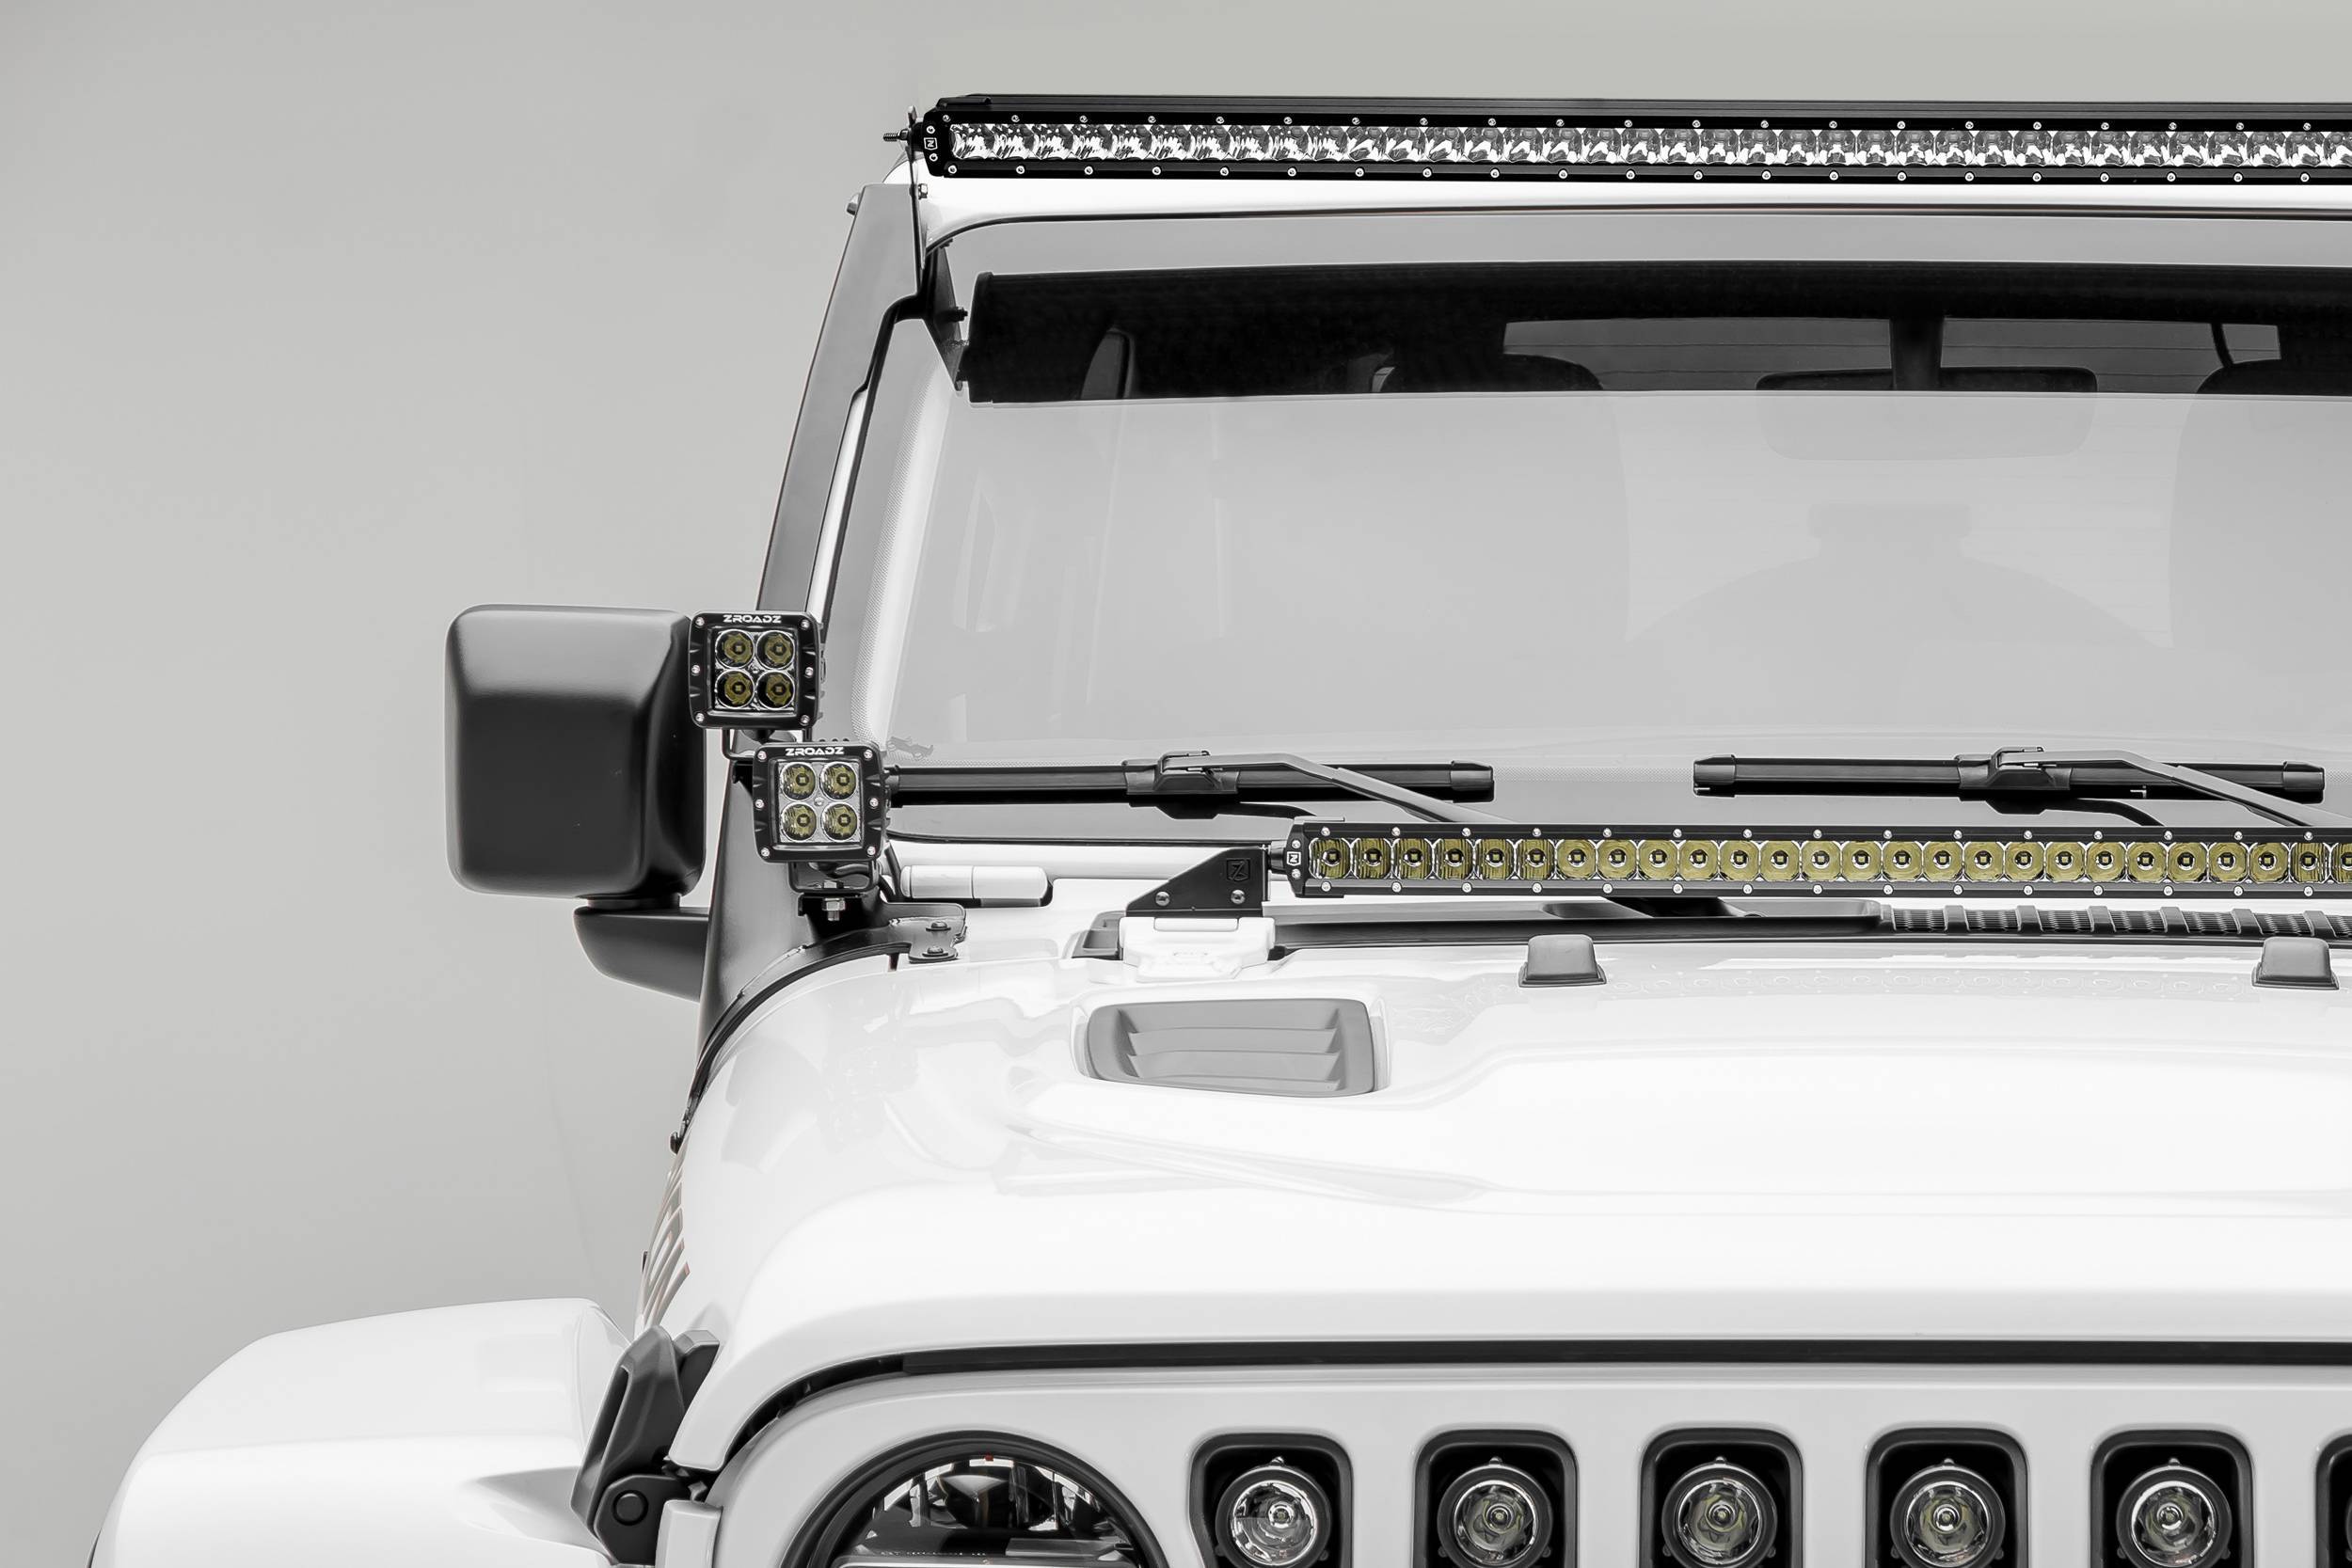 ZROADZ OFF ROAD PRODUCTS - Jeep JL, Gladiator Front Roof LED Kit with (1) 50 Inch LED Straight Single Row Slim Light Bar and (4) 3 Inch LED Pod Lights - Part # Z374831-KIT4S